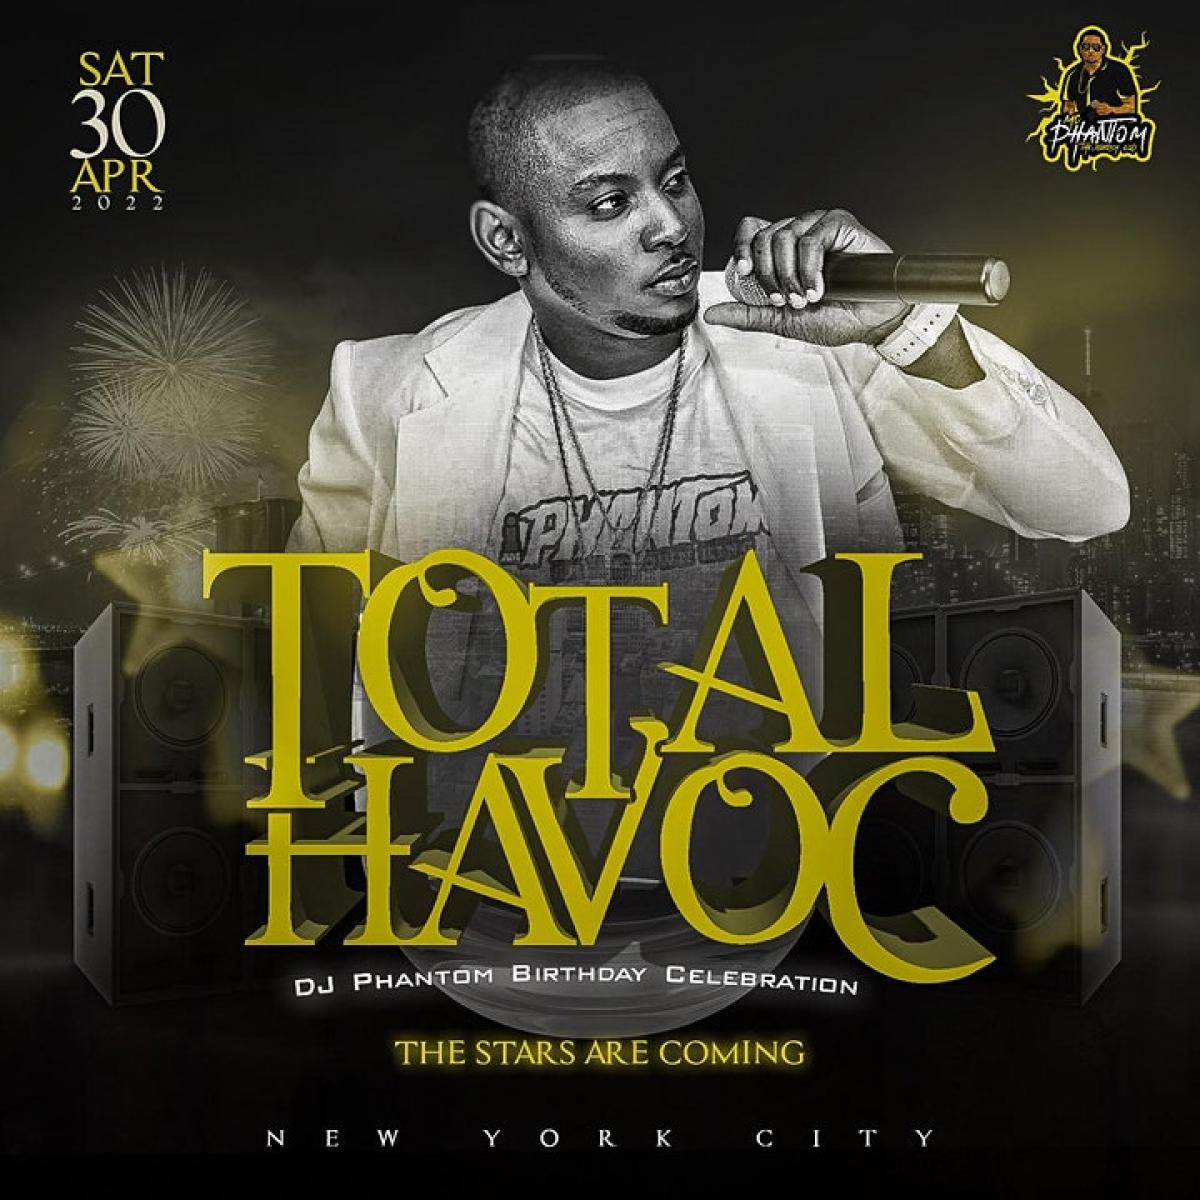 Total Havoc flyer or graphic.